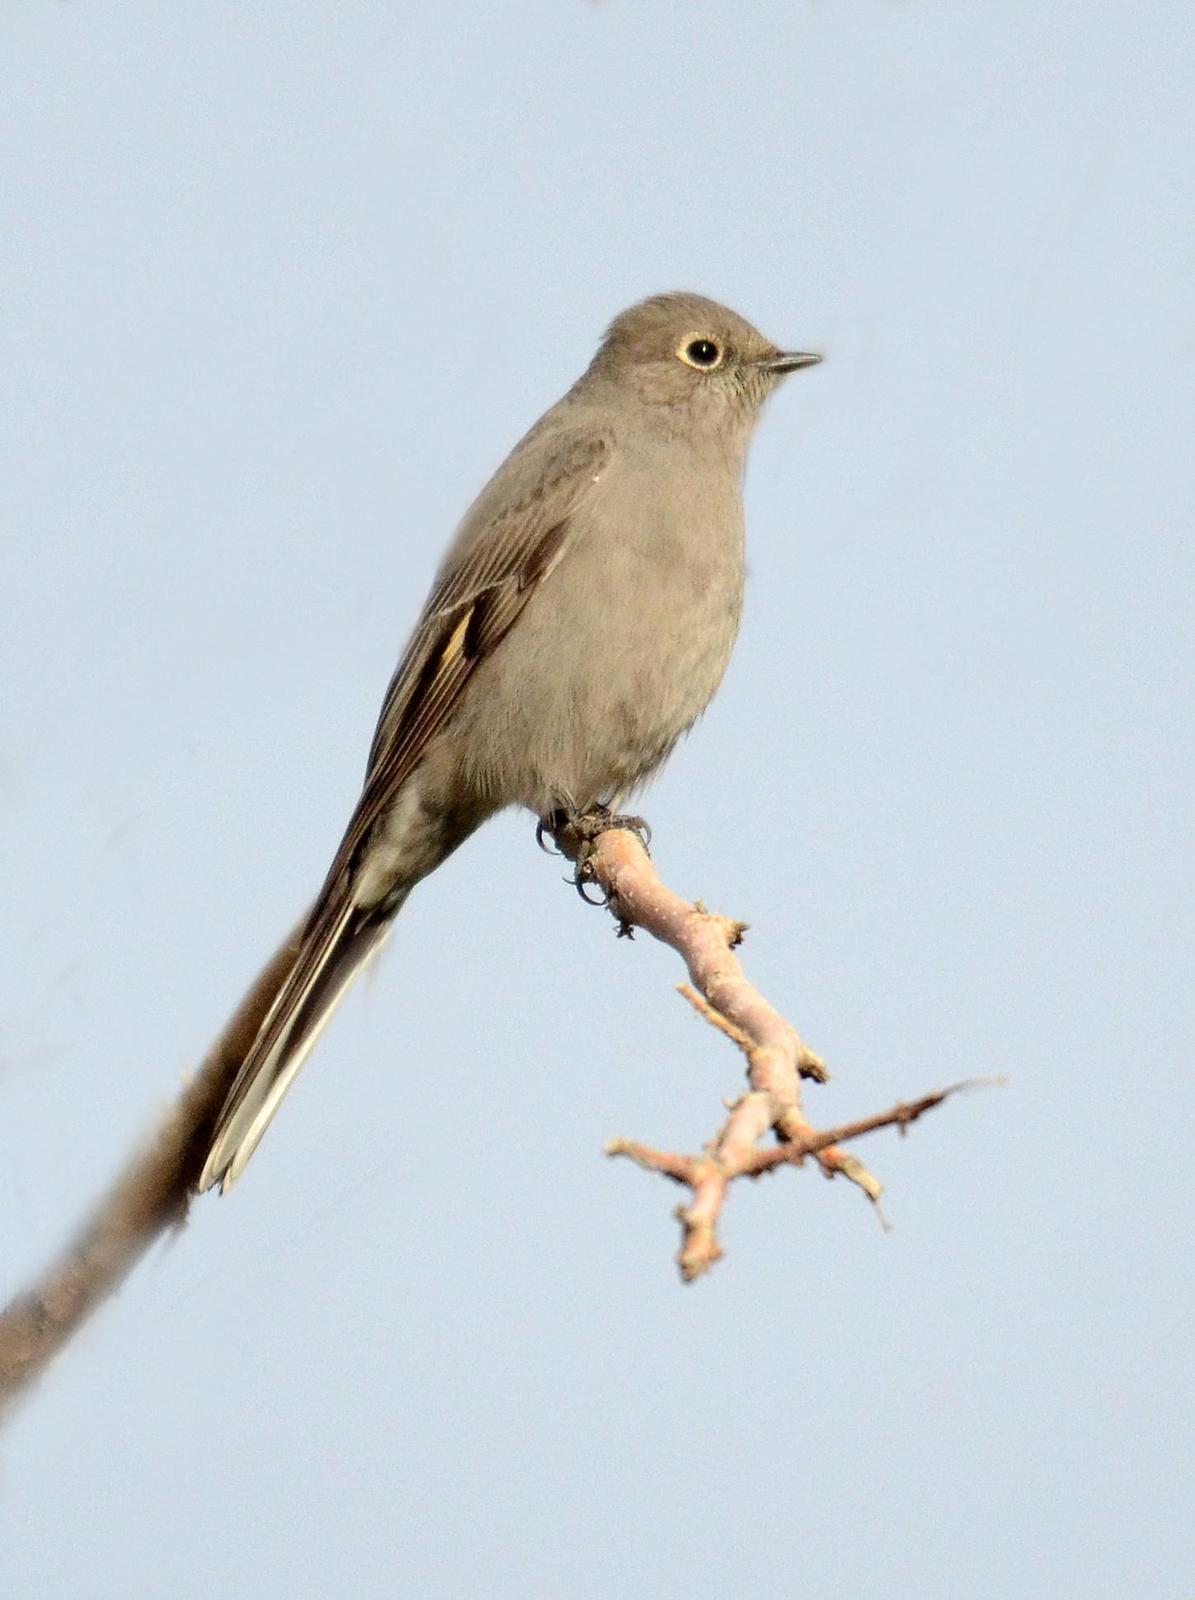 Townsend's Solitaire Photo by Steven Mlodinow